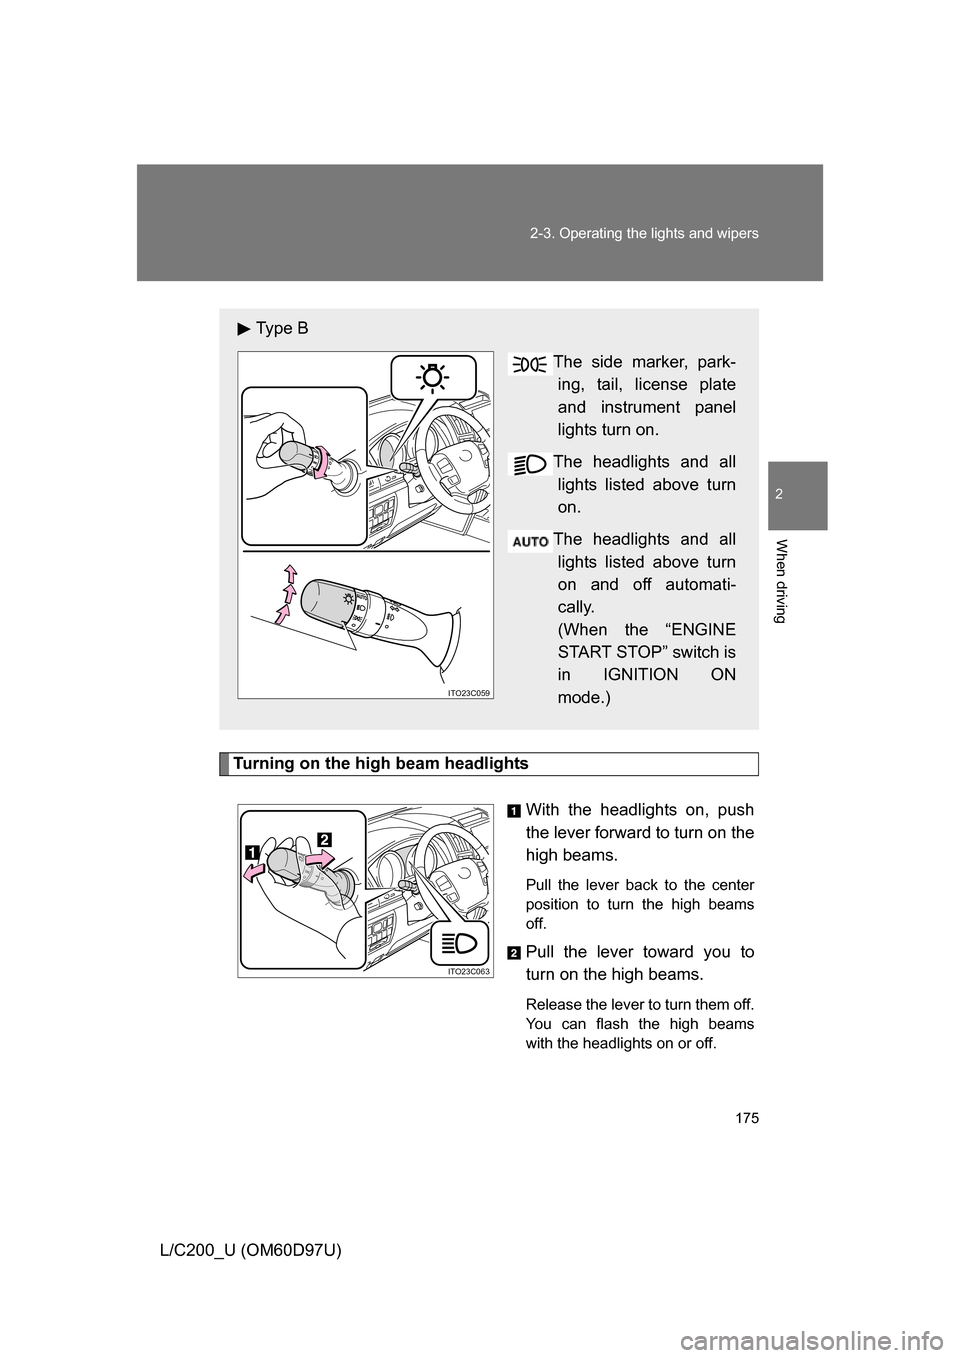 TOYOTA LAND CRUISER 2009 J200 Owners Manual 175
2-3. Operating the lights and wipers
2
When driving
L/C200_U (OM60D97U)
Turning on the high beam headlights
With the headlights on, push
the lever forward to turn on the
high beams. 
Pull the leve